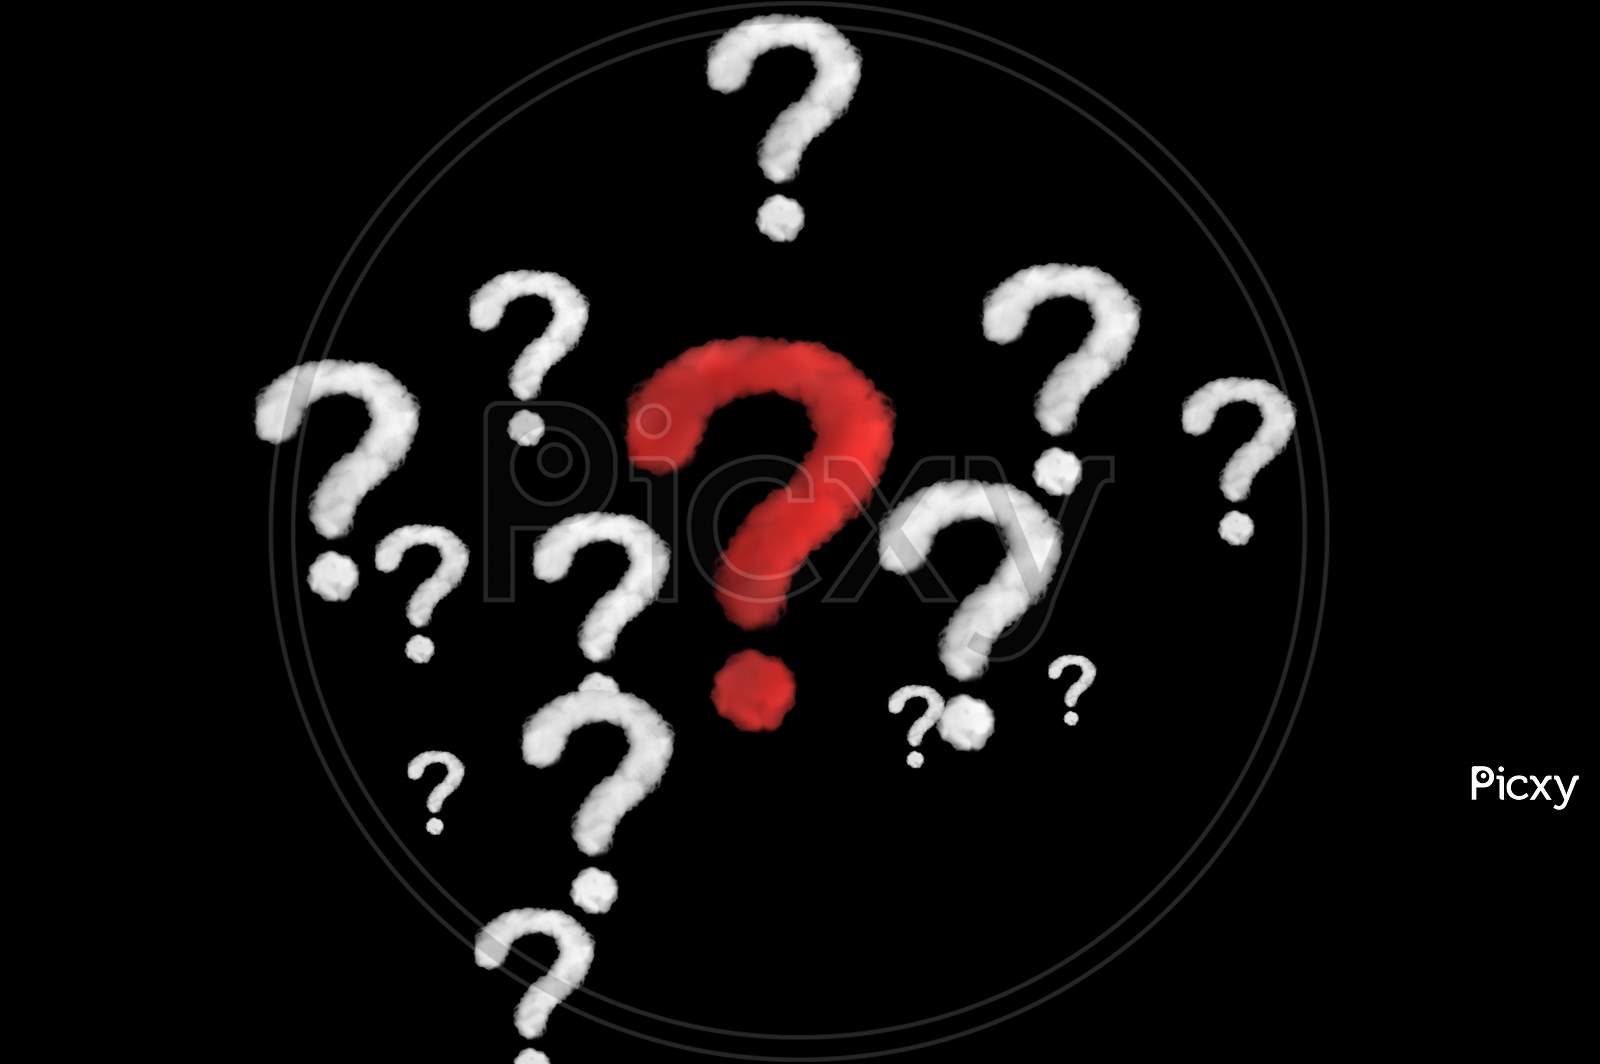 red question marks with black background